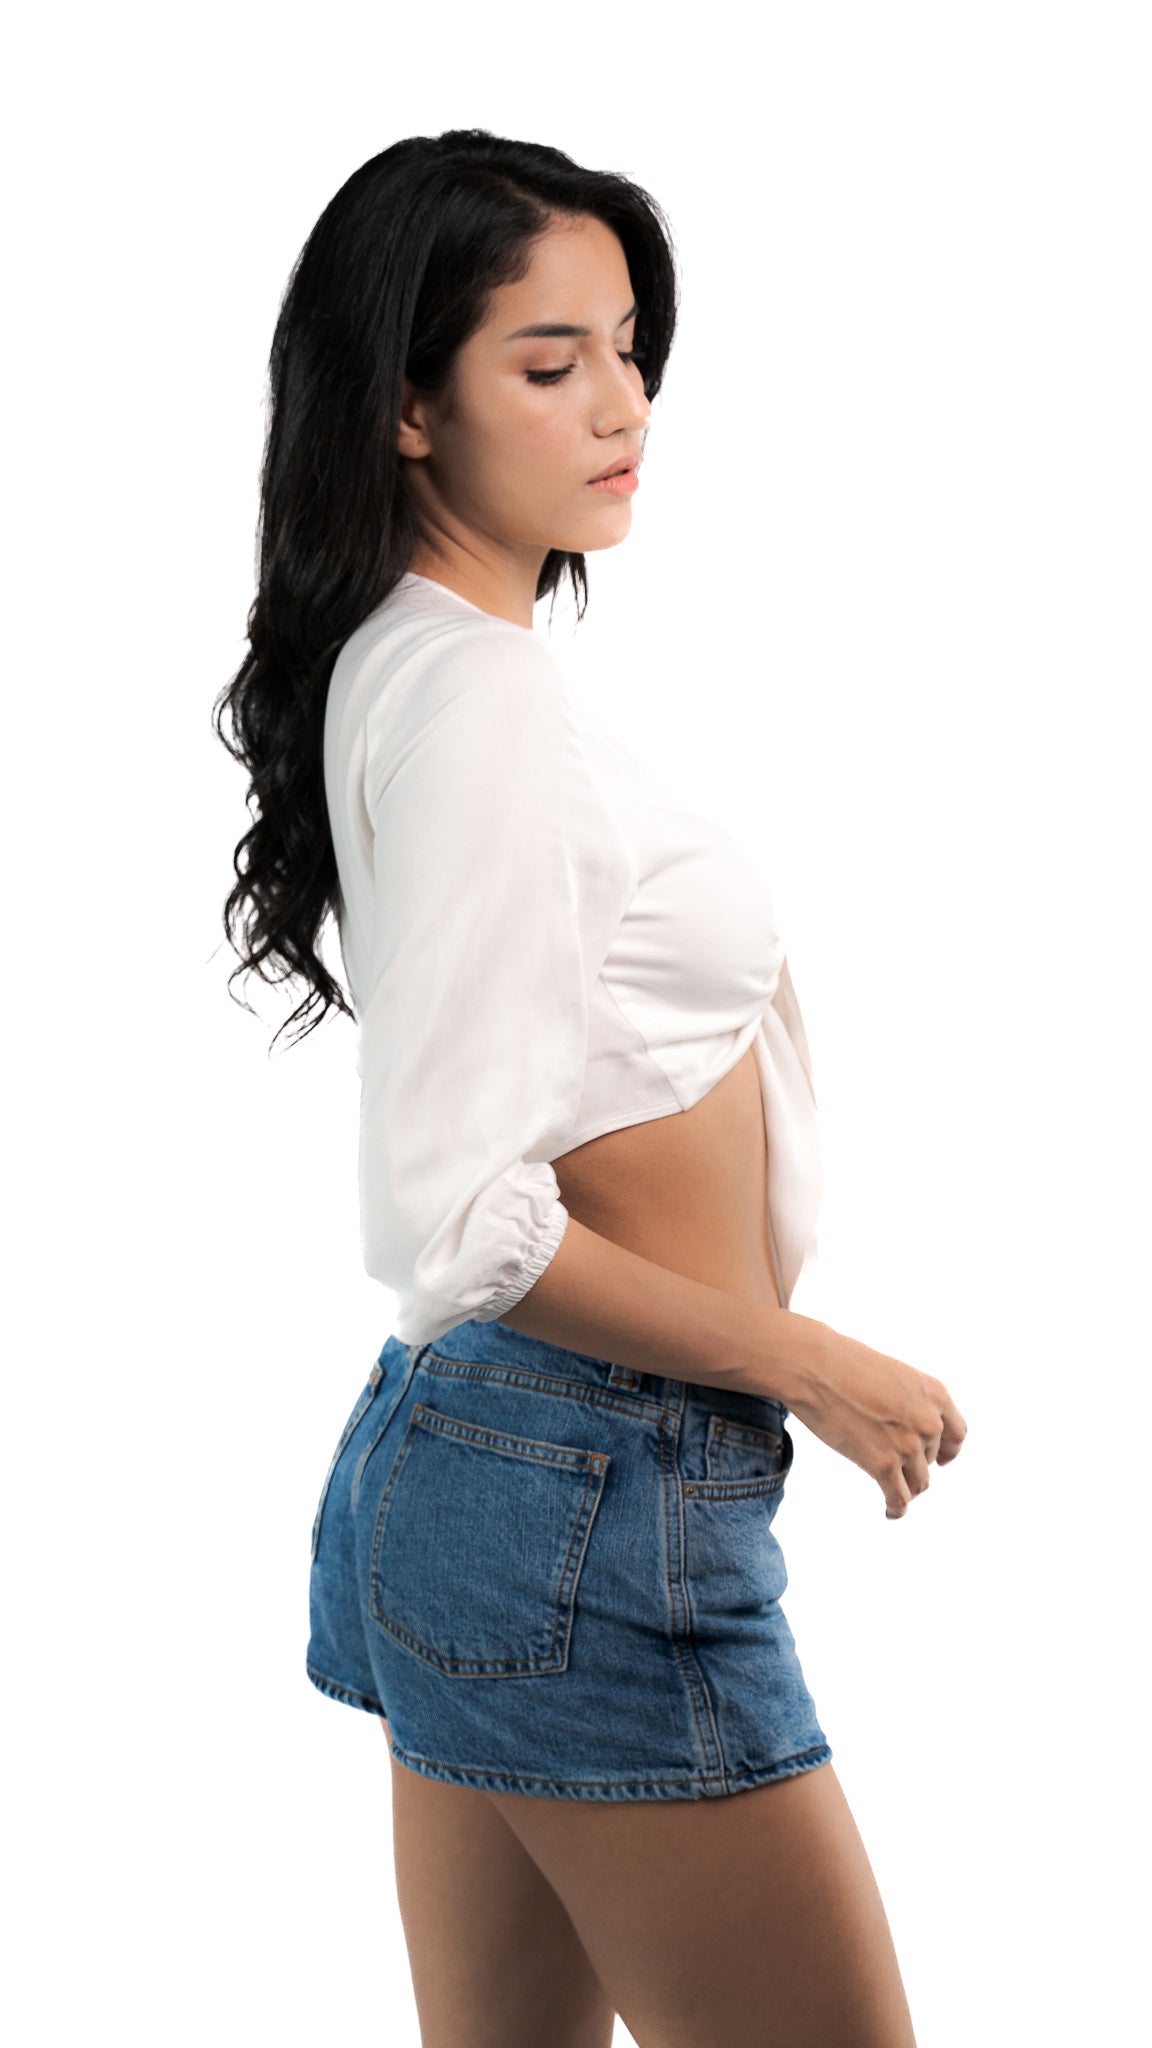 7,544 Sexy Girl Crop Top Images, Stock Photos, 3D objects, & Vectors